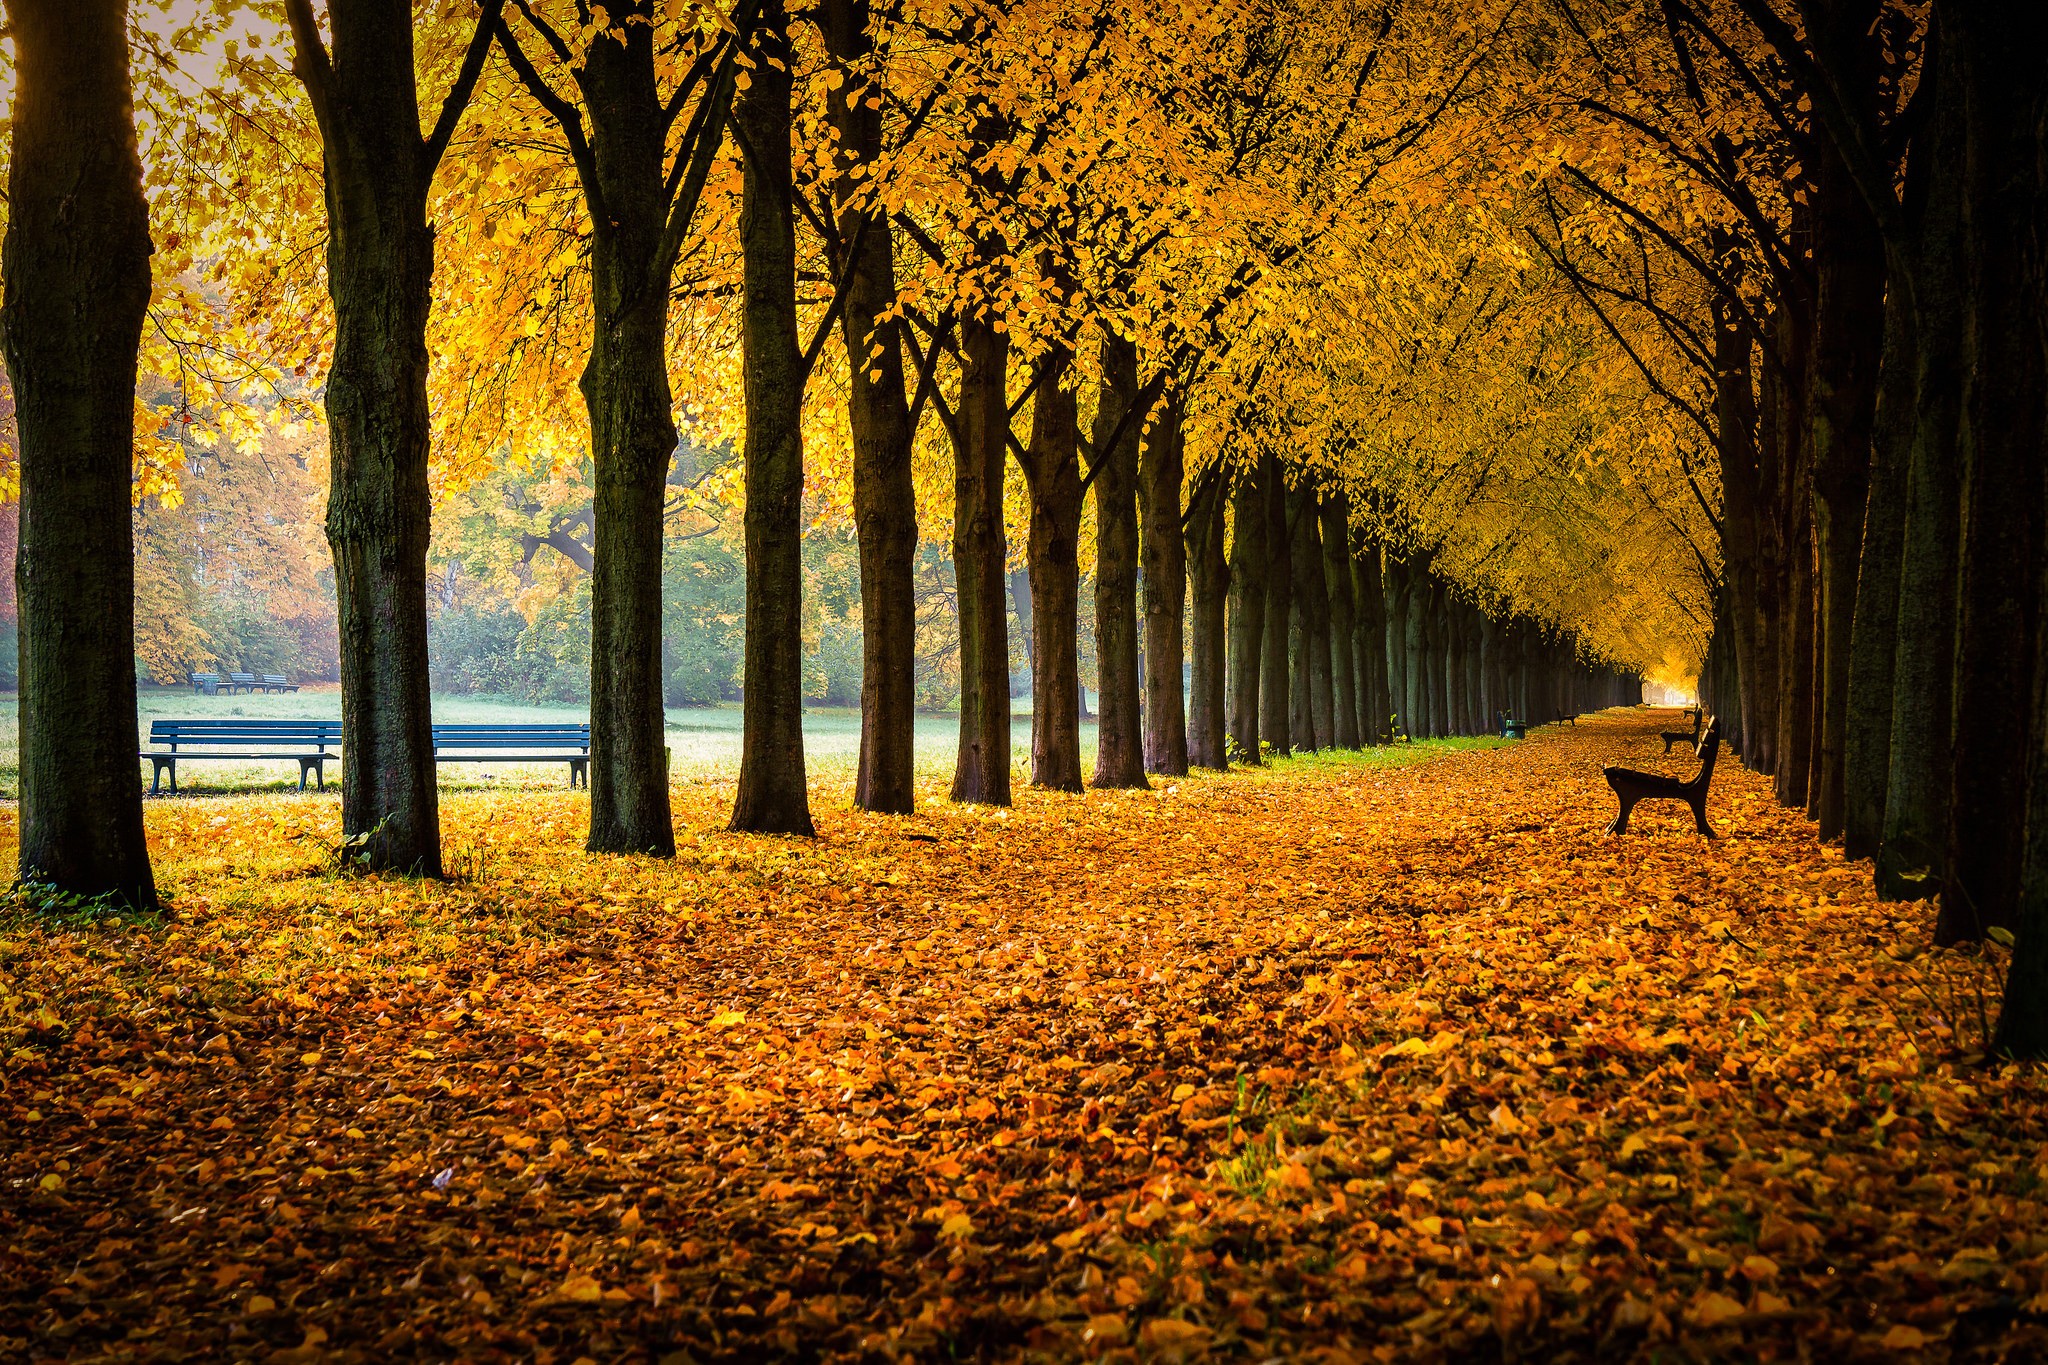 General 2048x1365 bench fall fallen leaves park outdoors trees plants